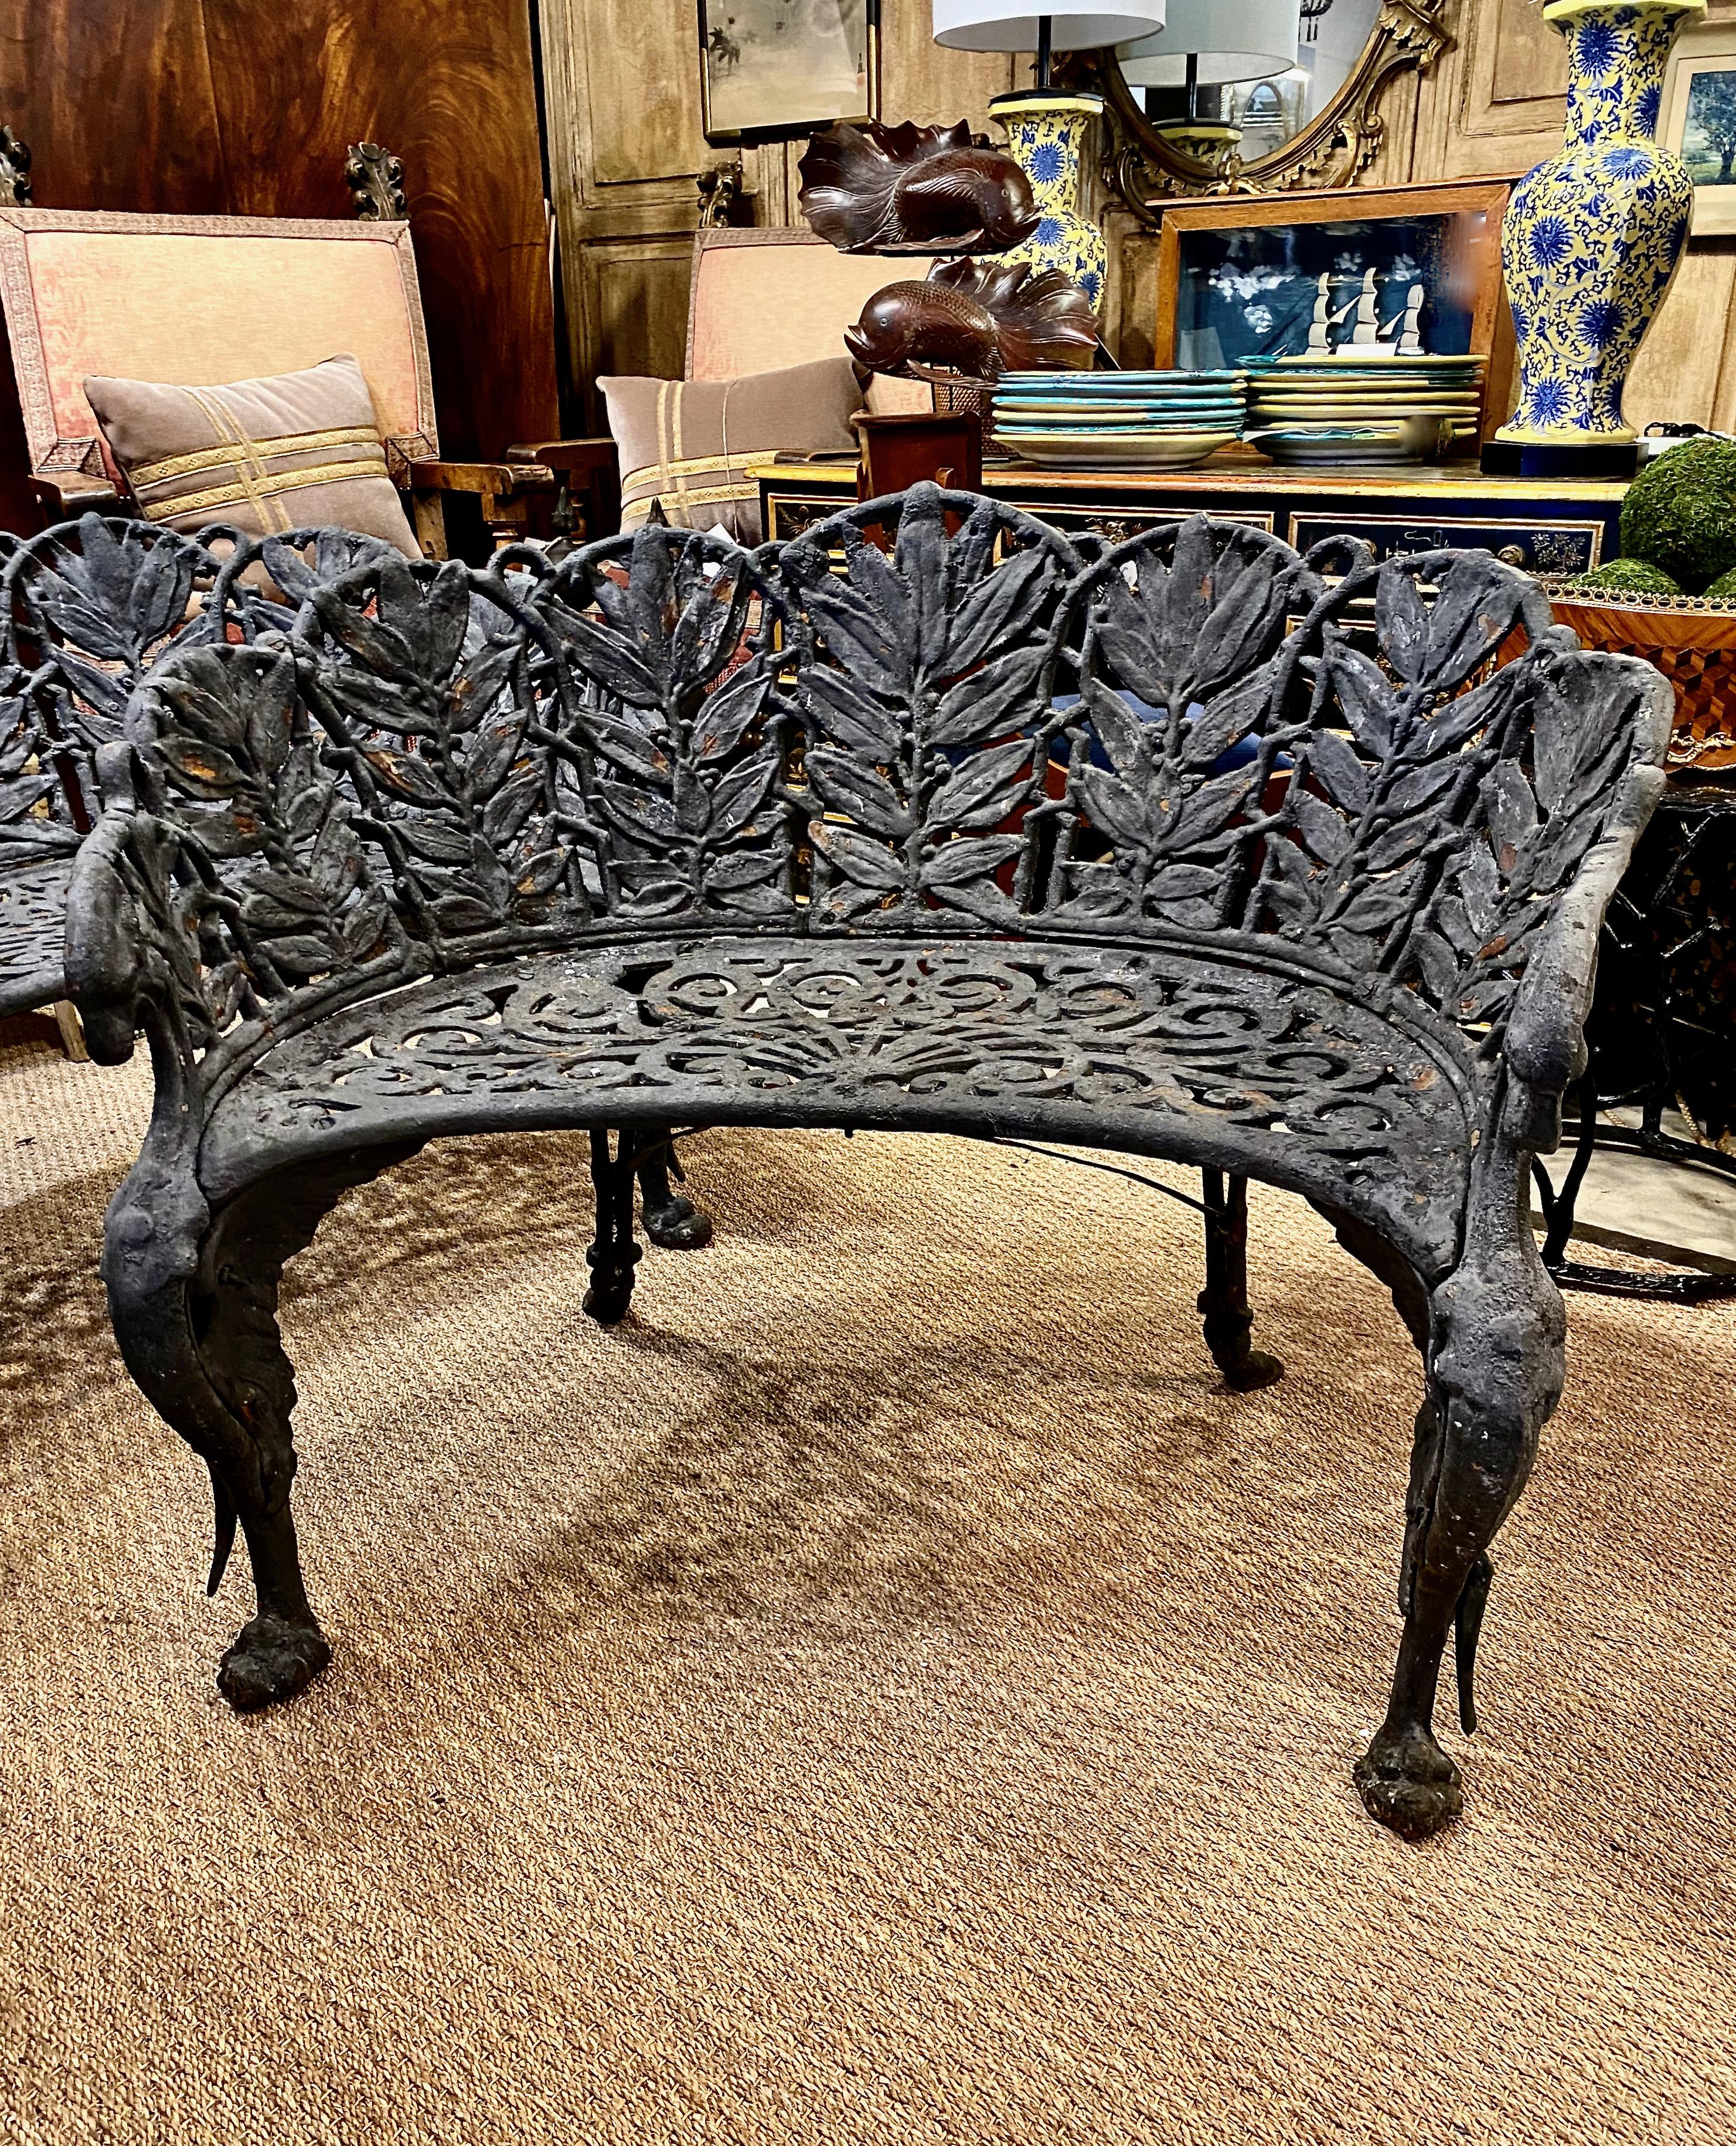 This is an extraordinary pair of Victorian cast iron benches in a fern pattern. The iron casting is of the highest level of artistry and craftsmanship. The front supports are in the form of winged griffins and the back legs seem to be scrolling